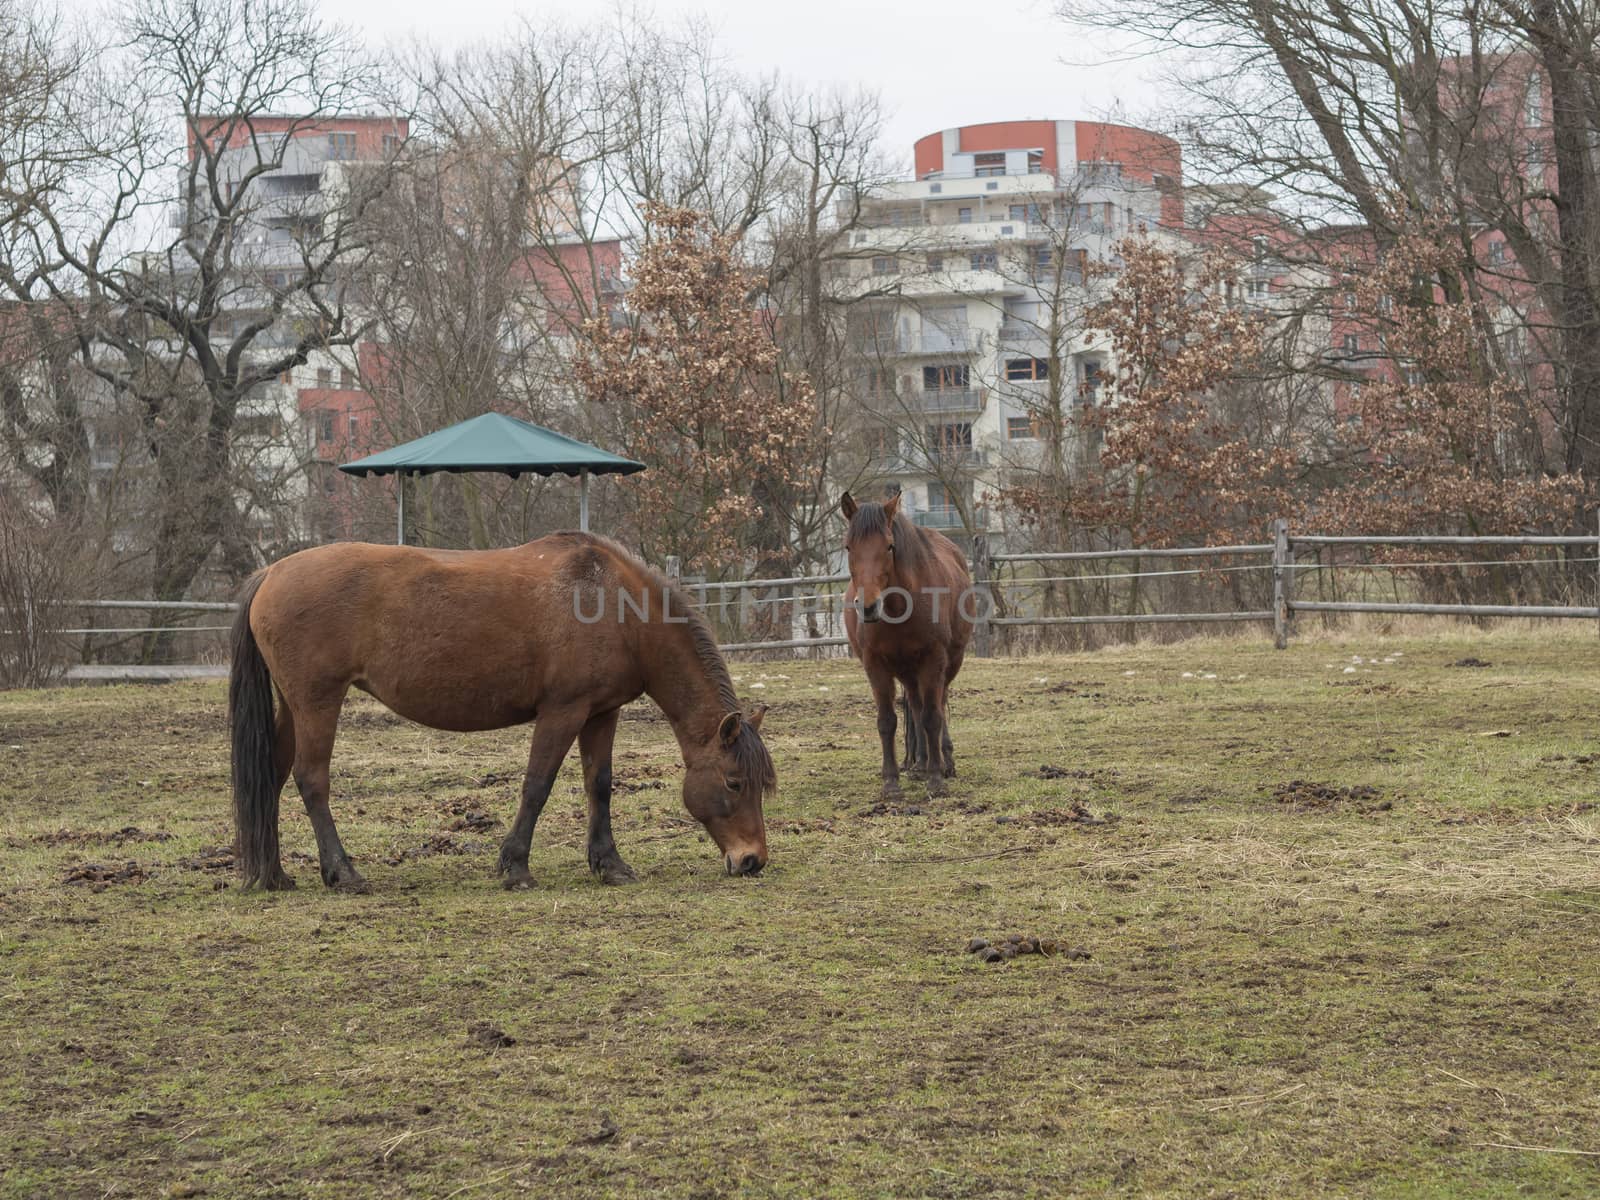 two ginger brown horses eating straw on meadow in late winter misty day in Prague park, bare treea and new rental houses in background